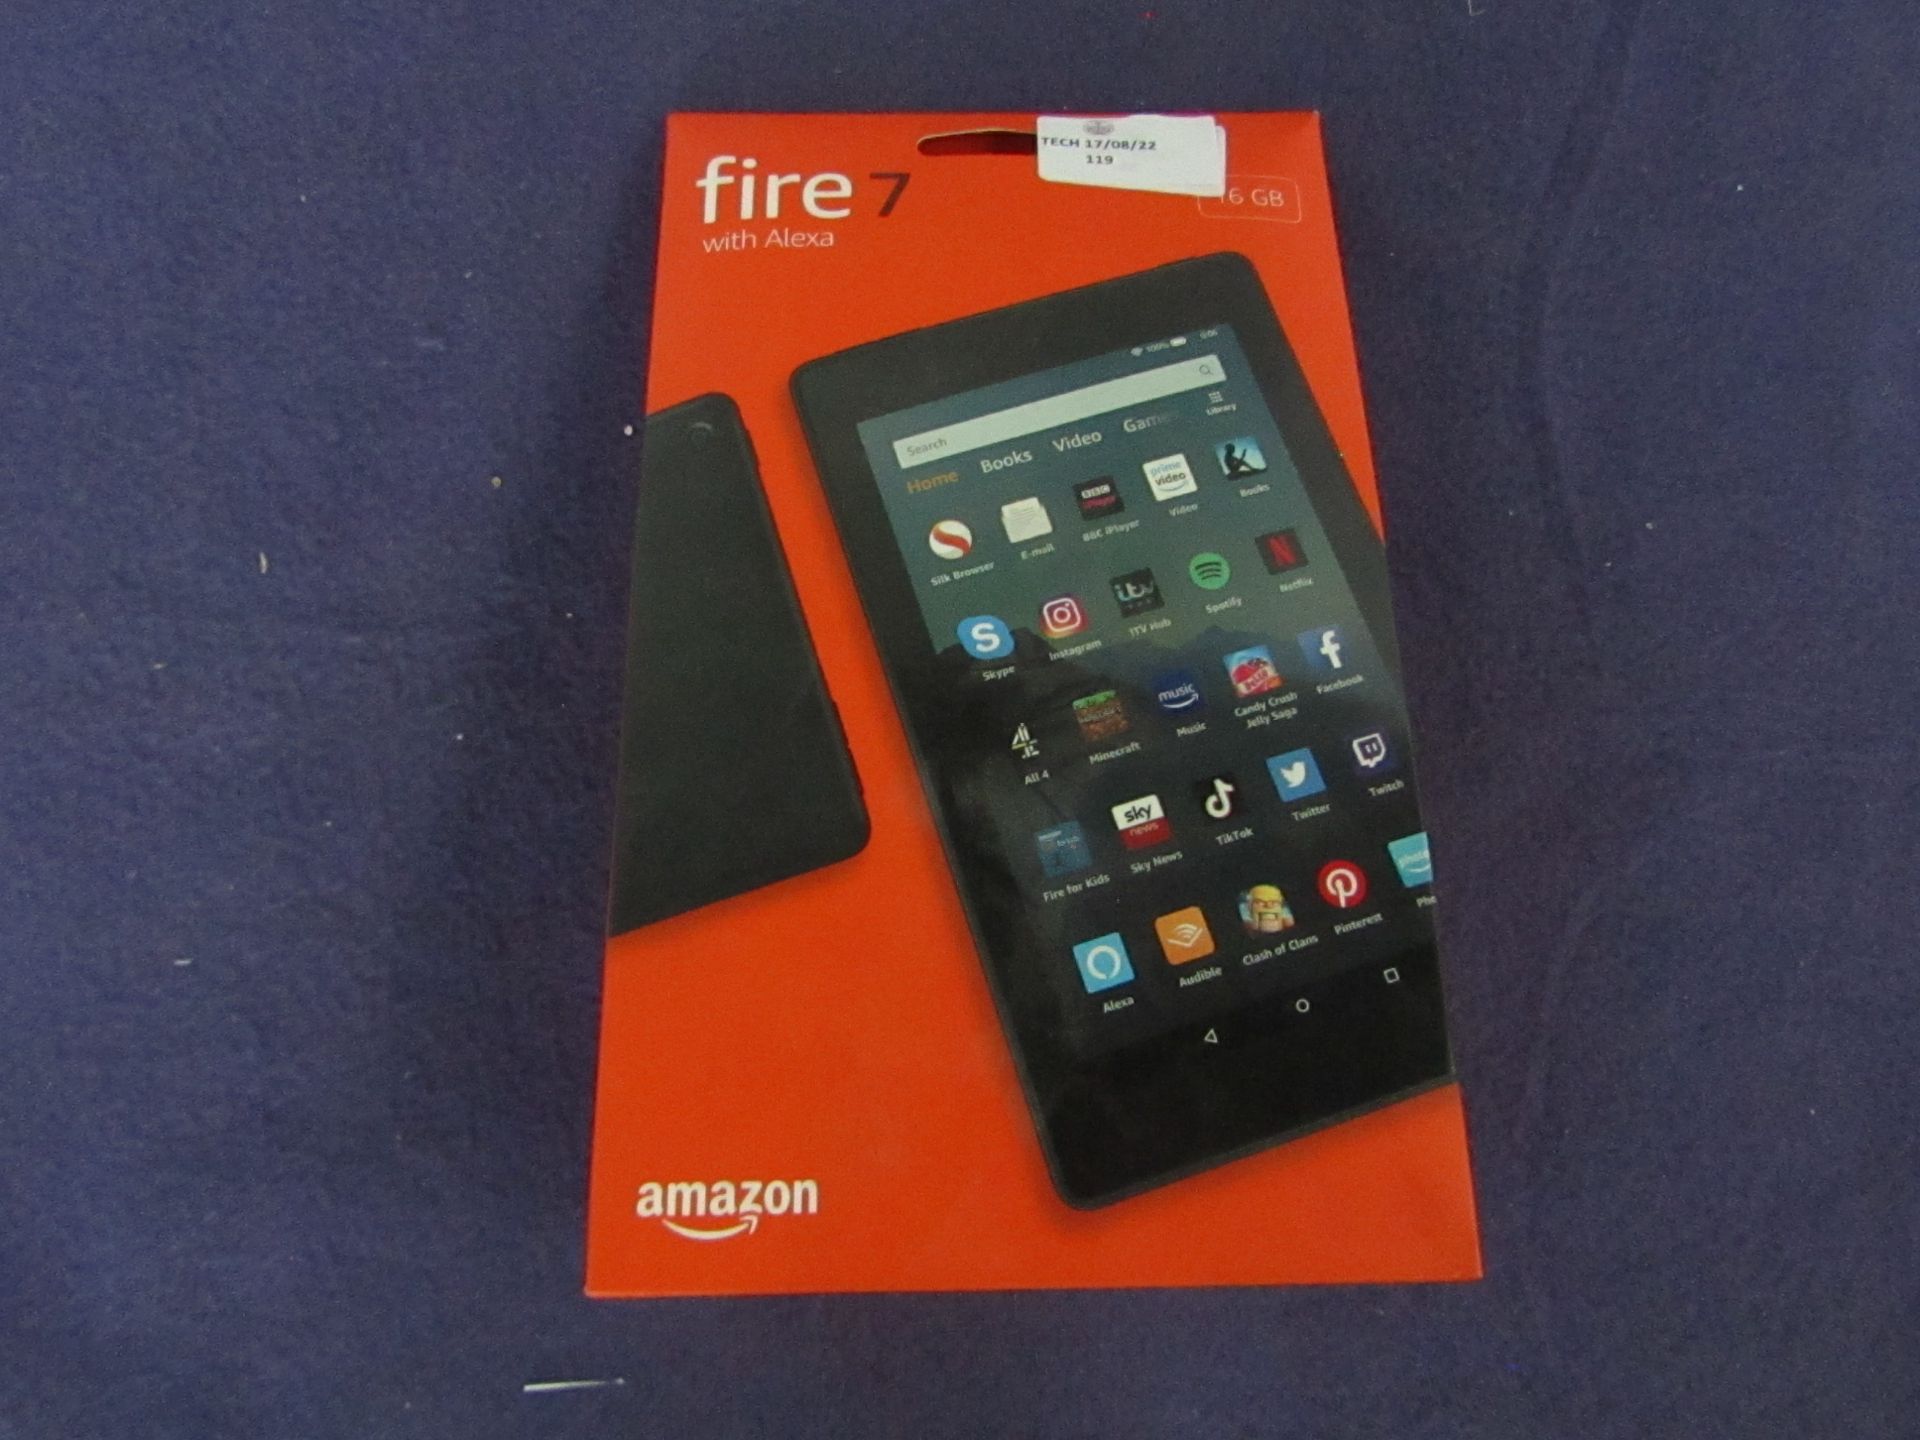 Amazon Fire 7 Tablet 16GB With Alexa, Black, Untested As Still In Packaging, RRP £59.99 @ Argos.